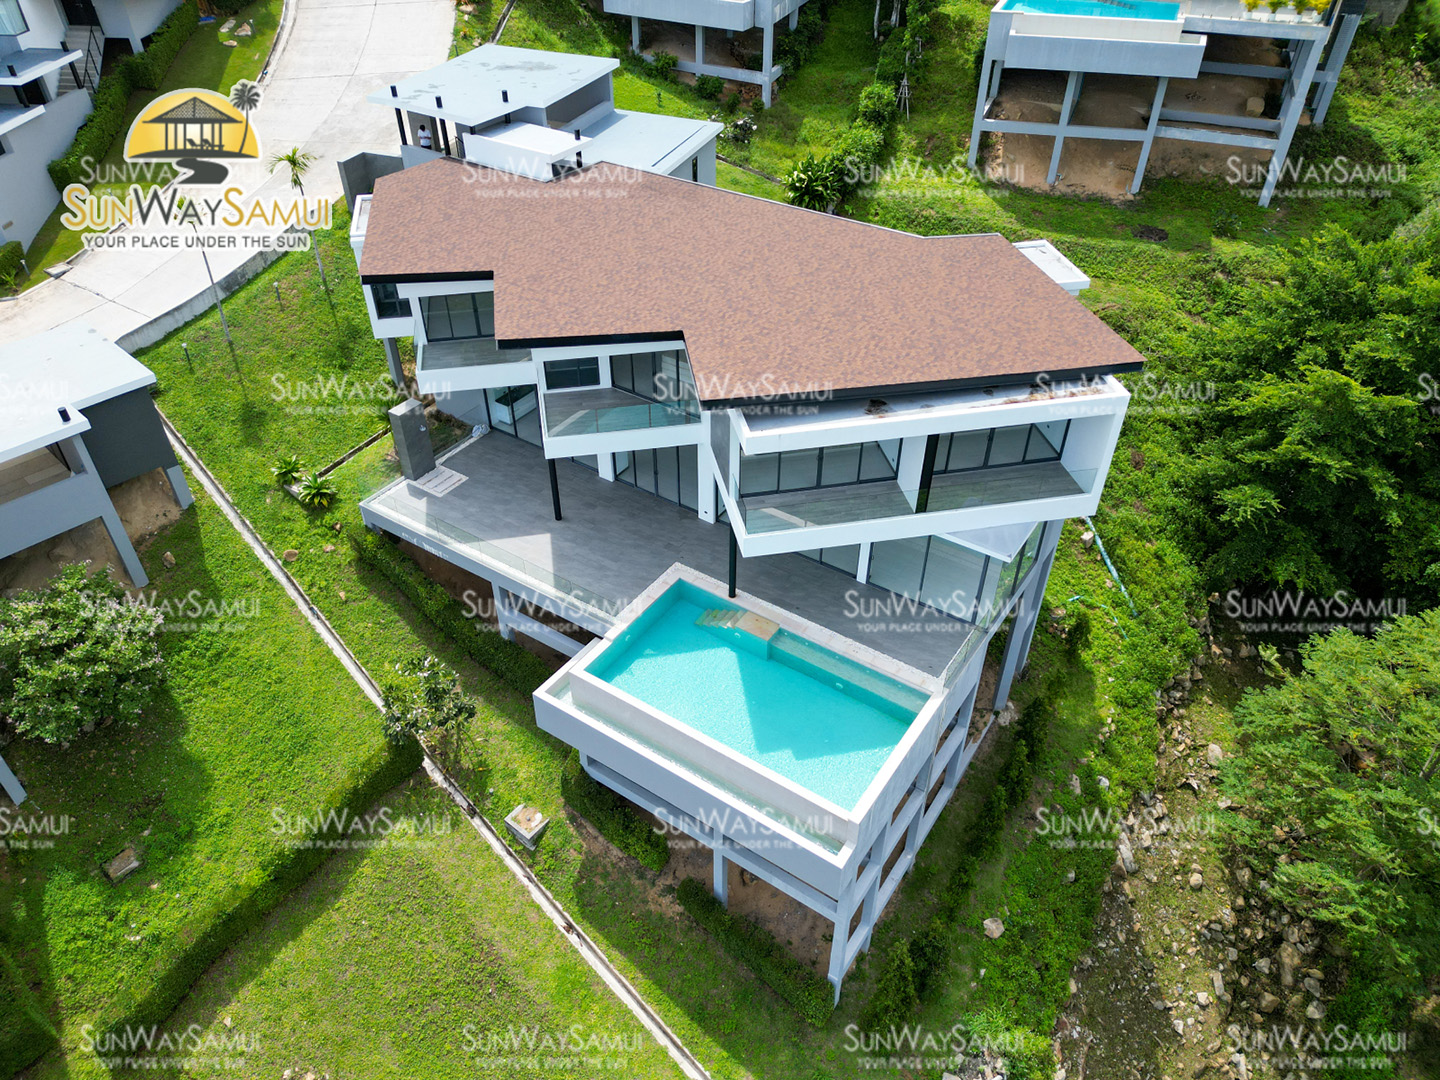 Verano Residence - Quality 4+1 Bedroom Seaview Pool Villa in Chaweng Noi for Sale: Verano Residence - Quality 4+1 Bedroom Seaview Pool Villa in Chaweng Noi for Sale